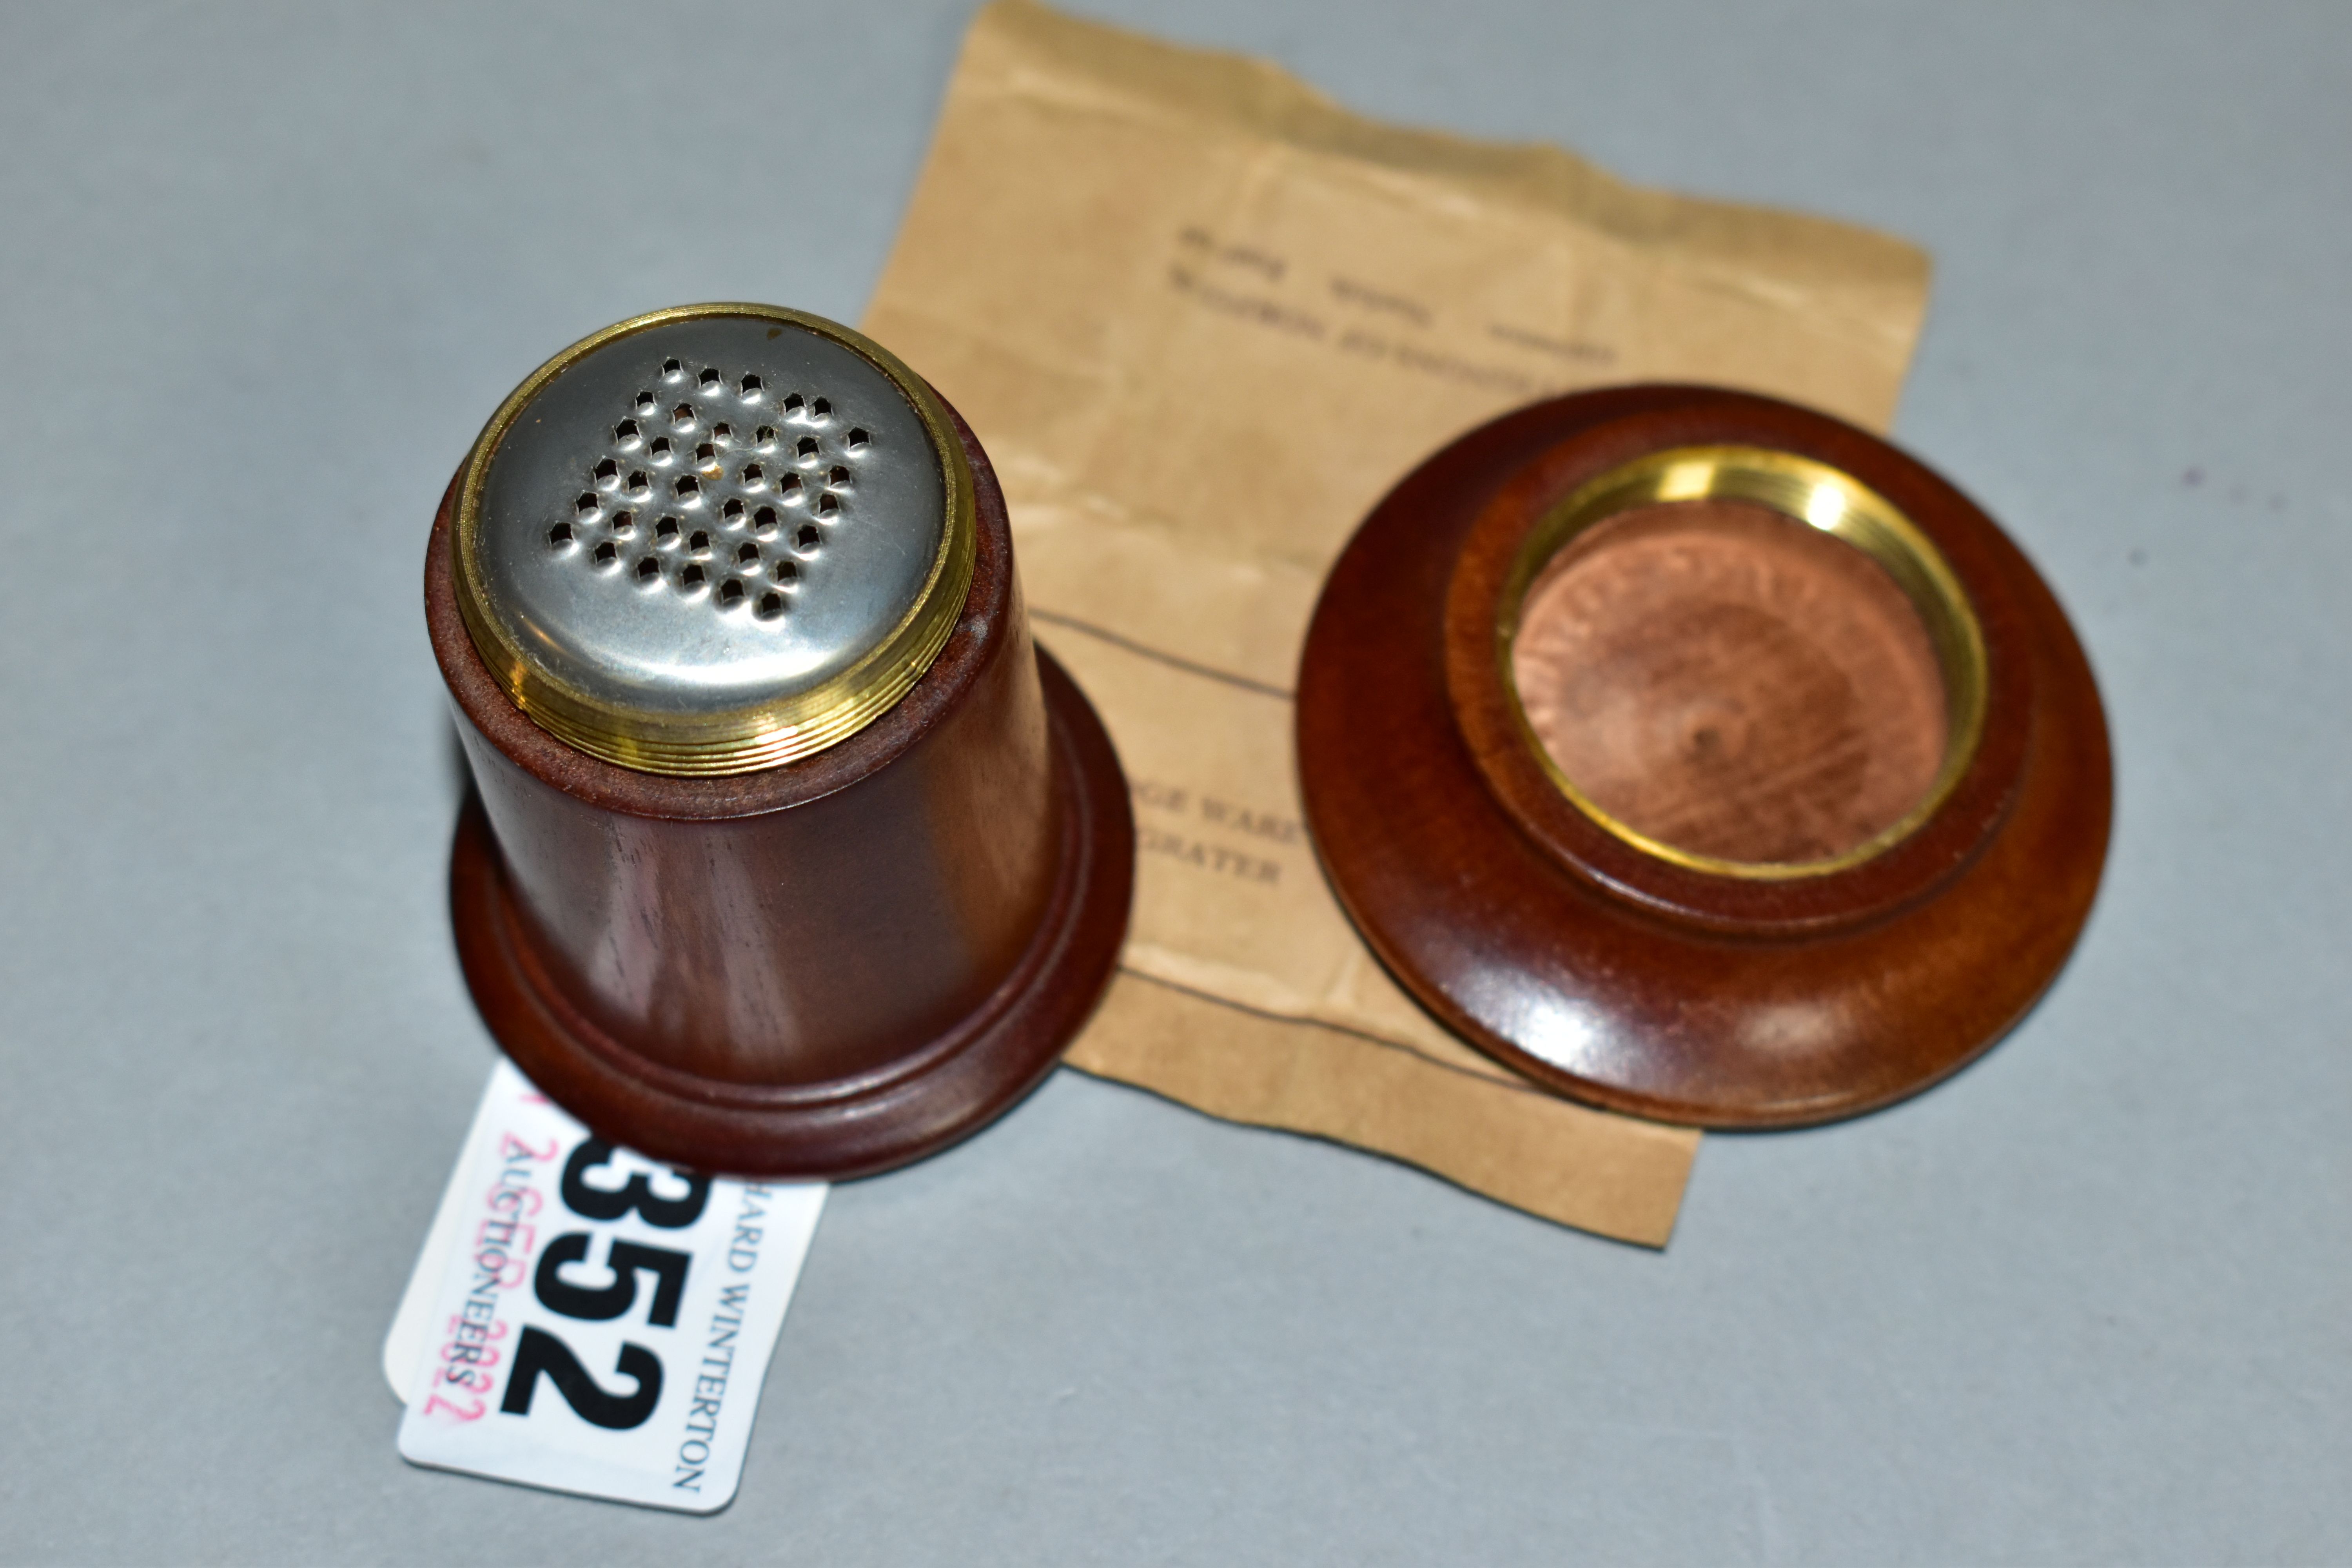 A TUNBRIDGEWARE STYLE NUTMEG GRATER, the lid, with inlaid star pattern, unscrews to reveal the metal - Image 3 of 3